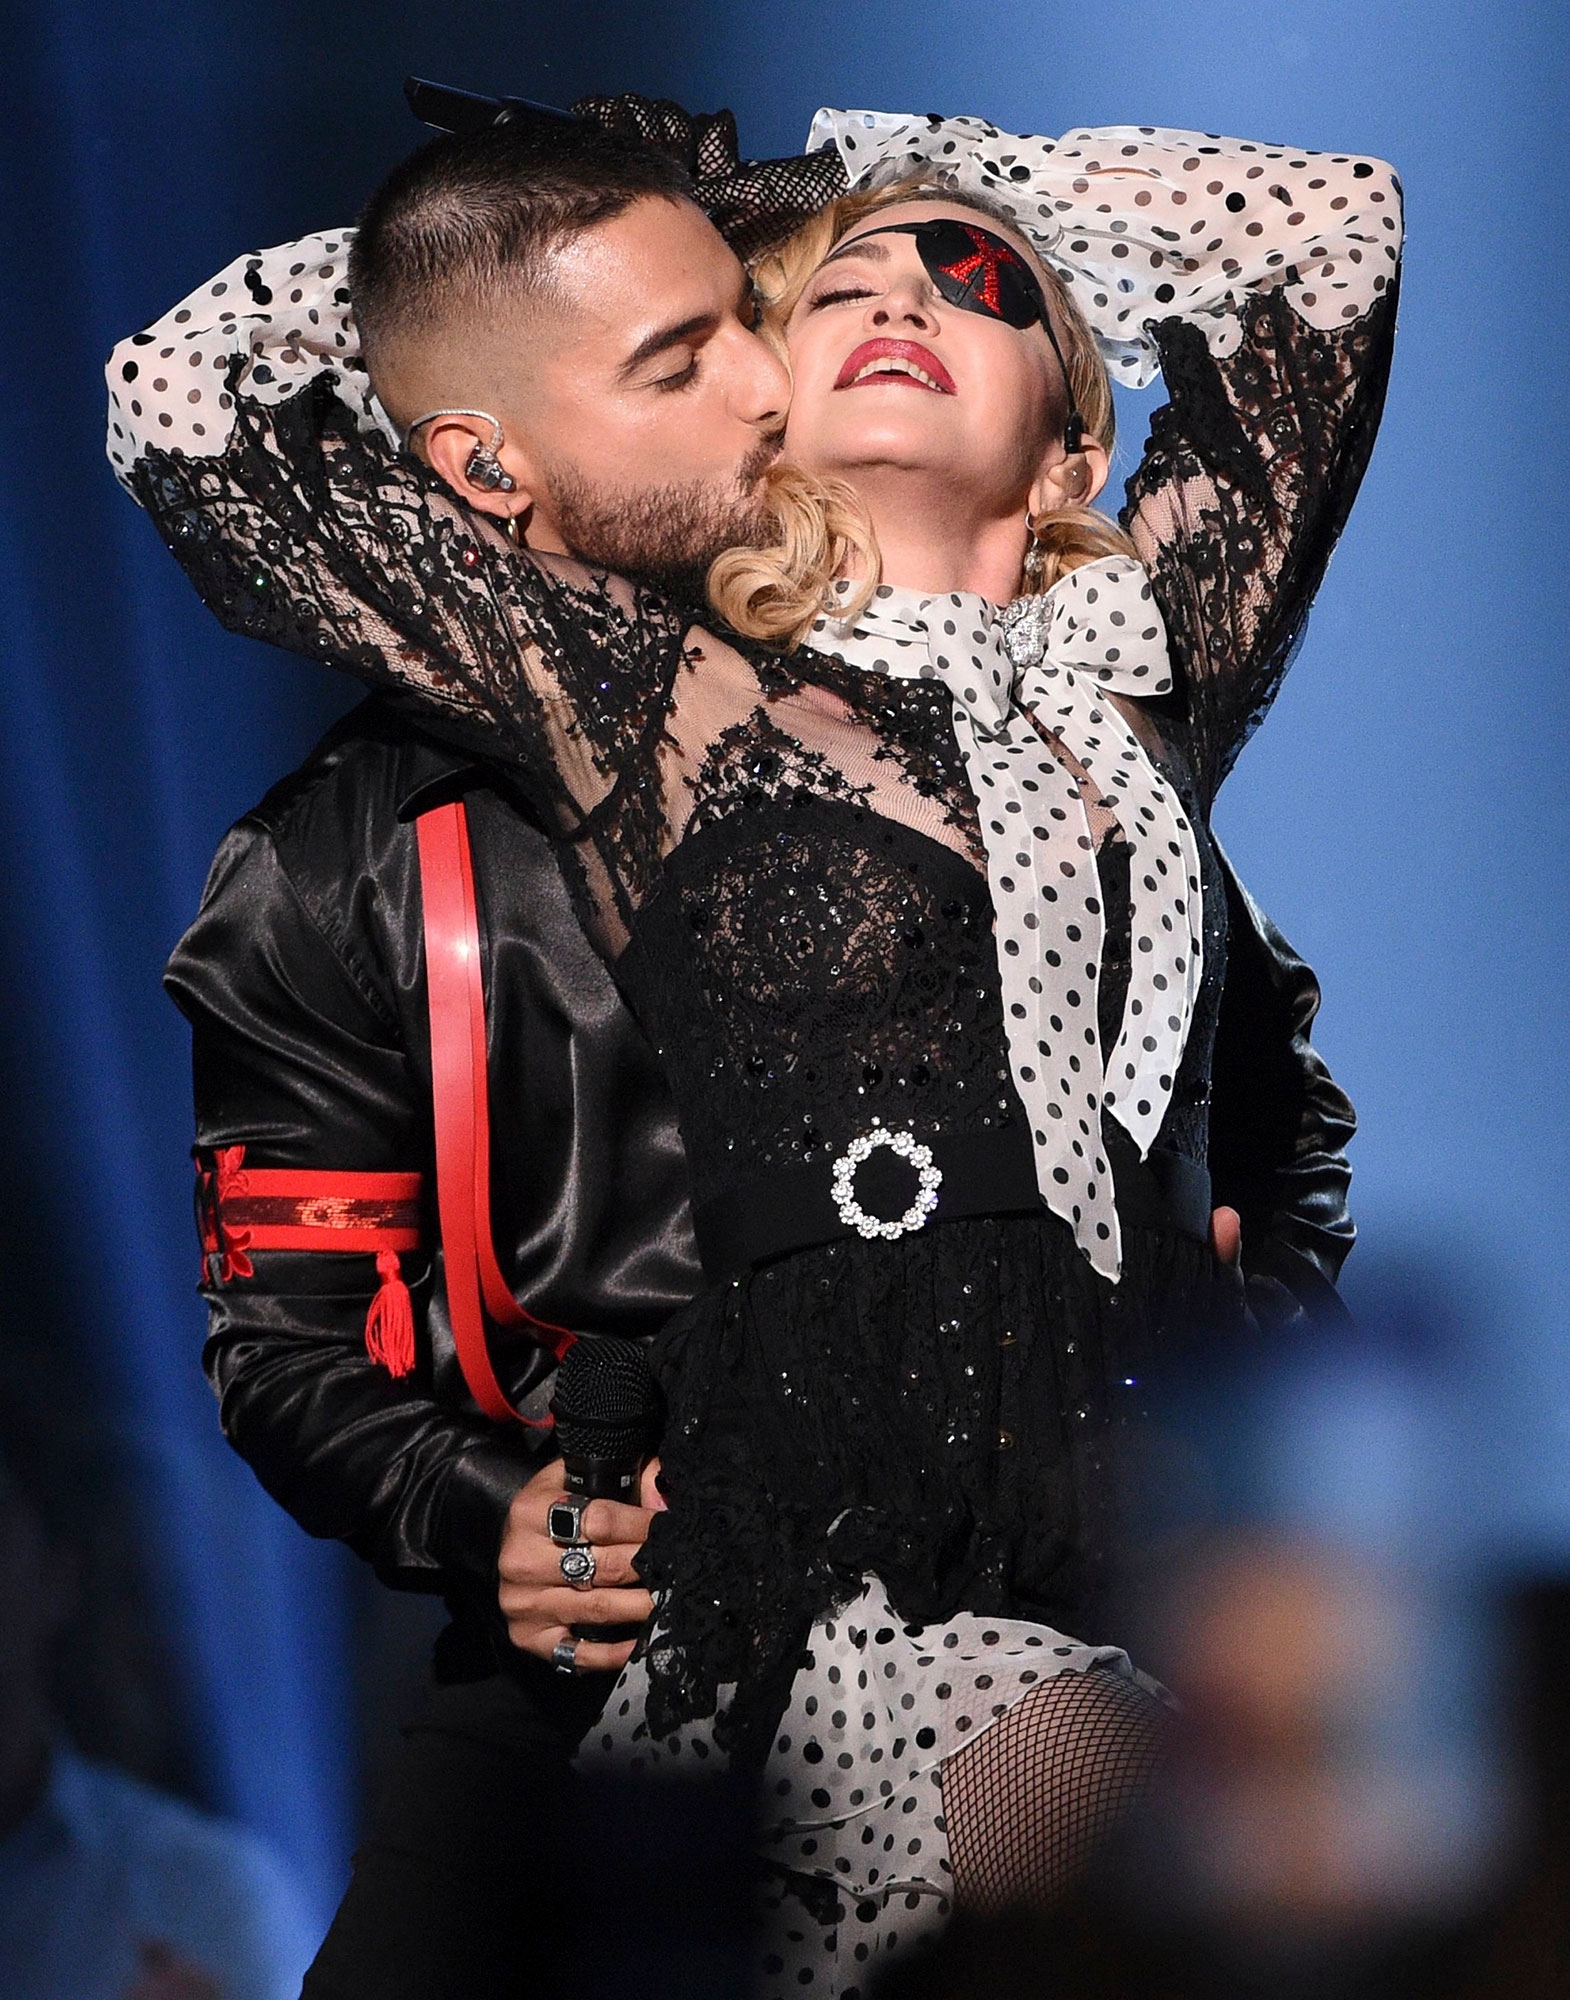 20190502-pictures-madonna-bbma-performance-21.jpg